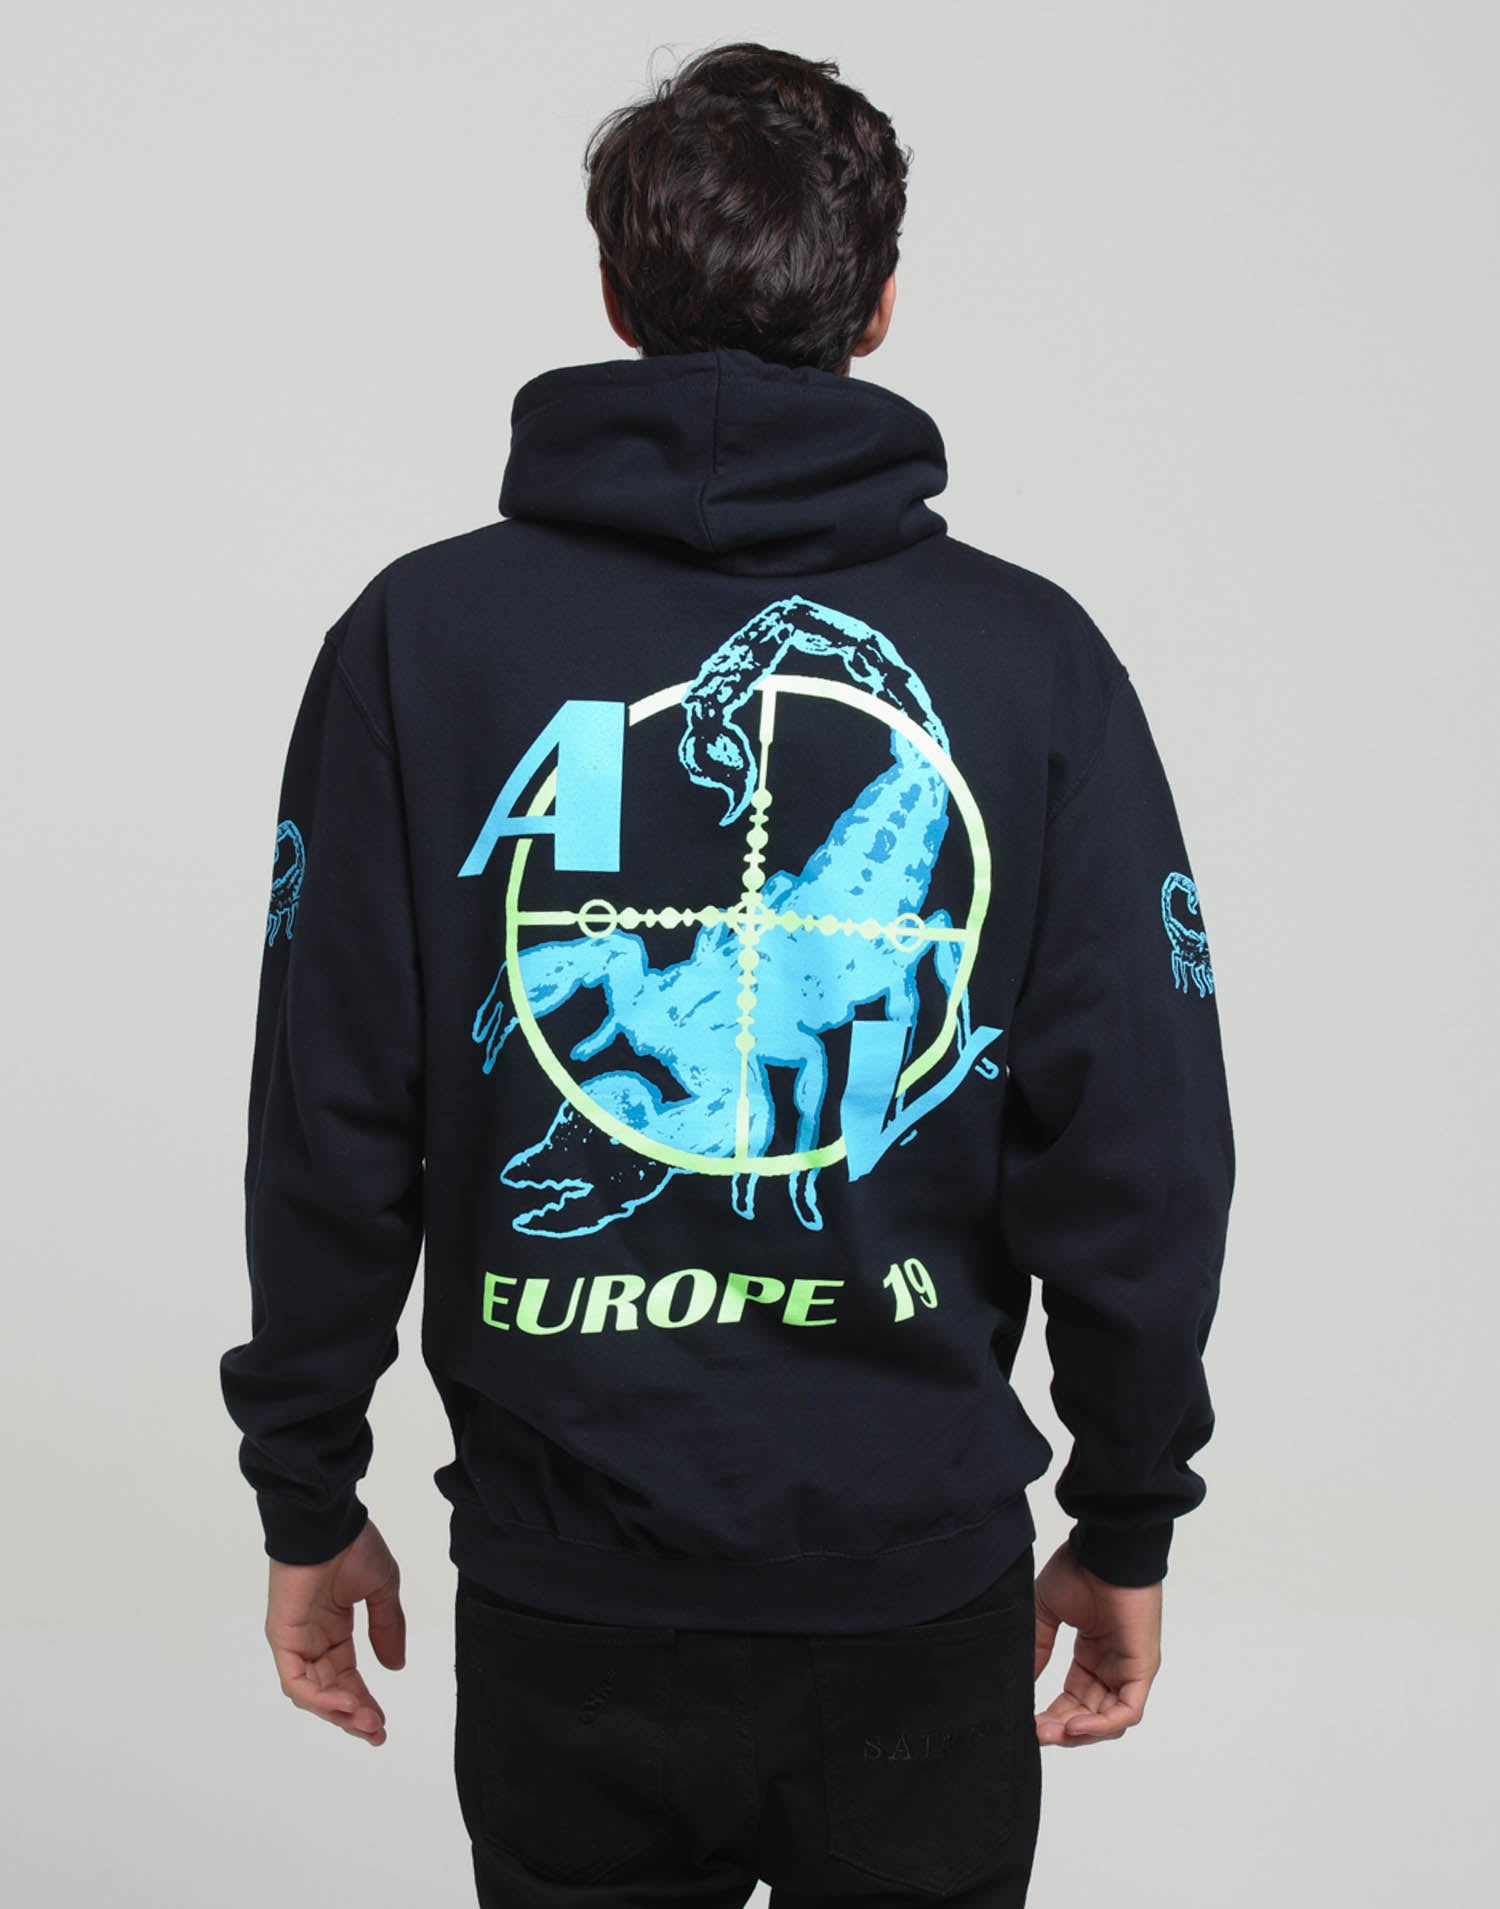 assassination vacation tour hoodie